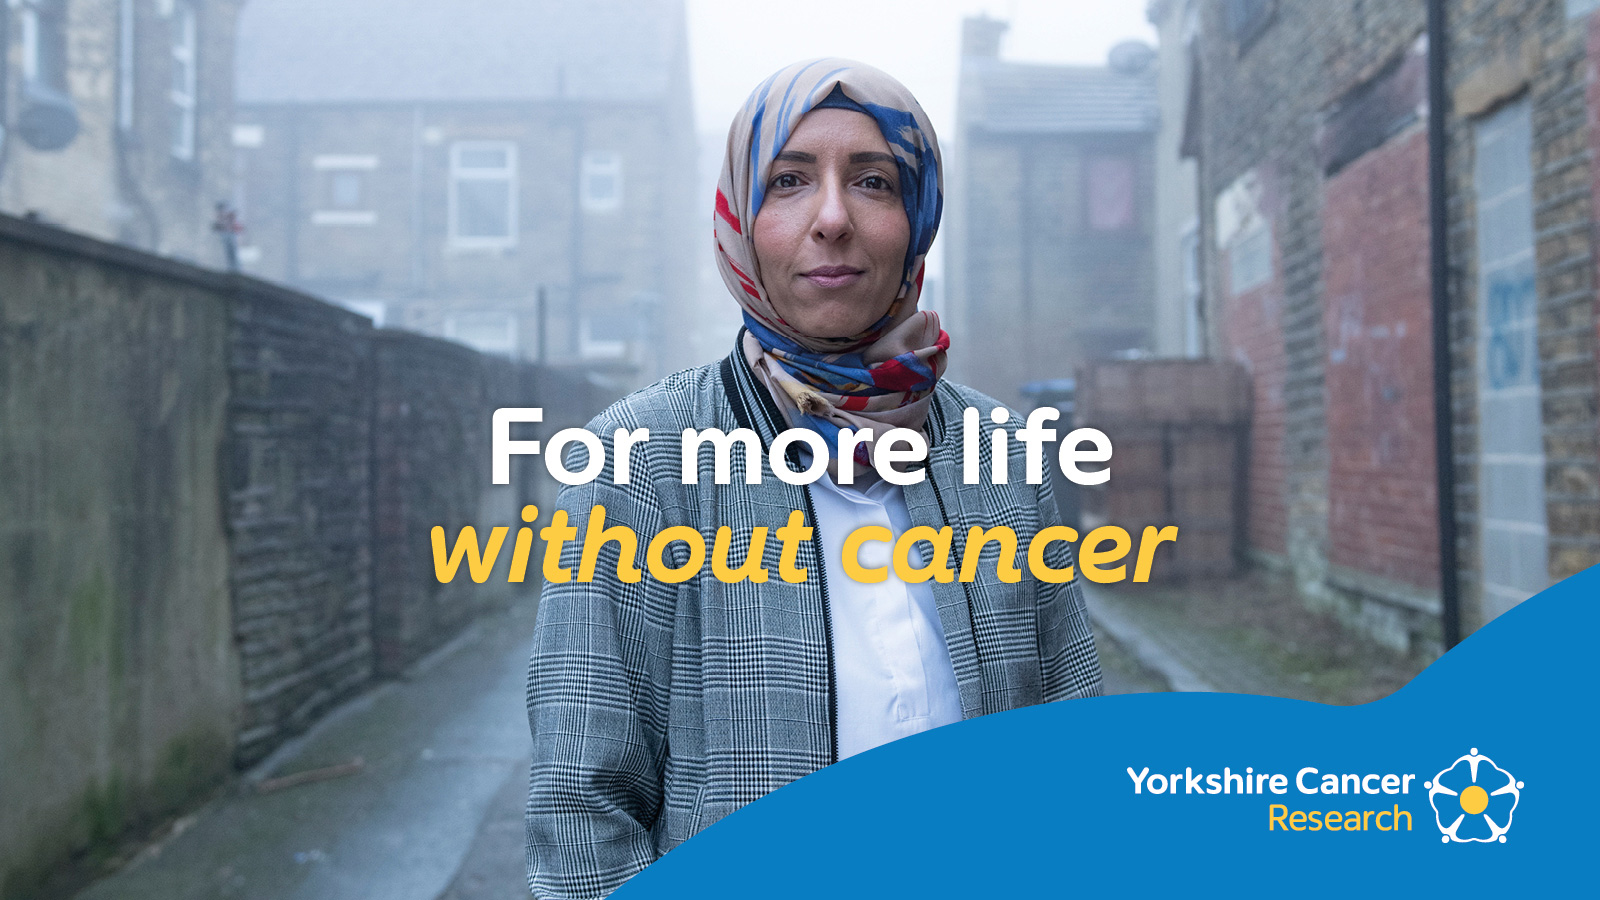 uk-yorkshire-cancer-research-documentary-reportage-photography-hannah-maule-ffinch-morelife